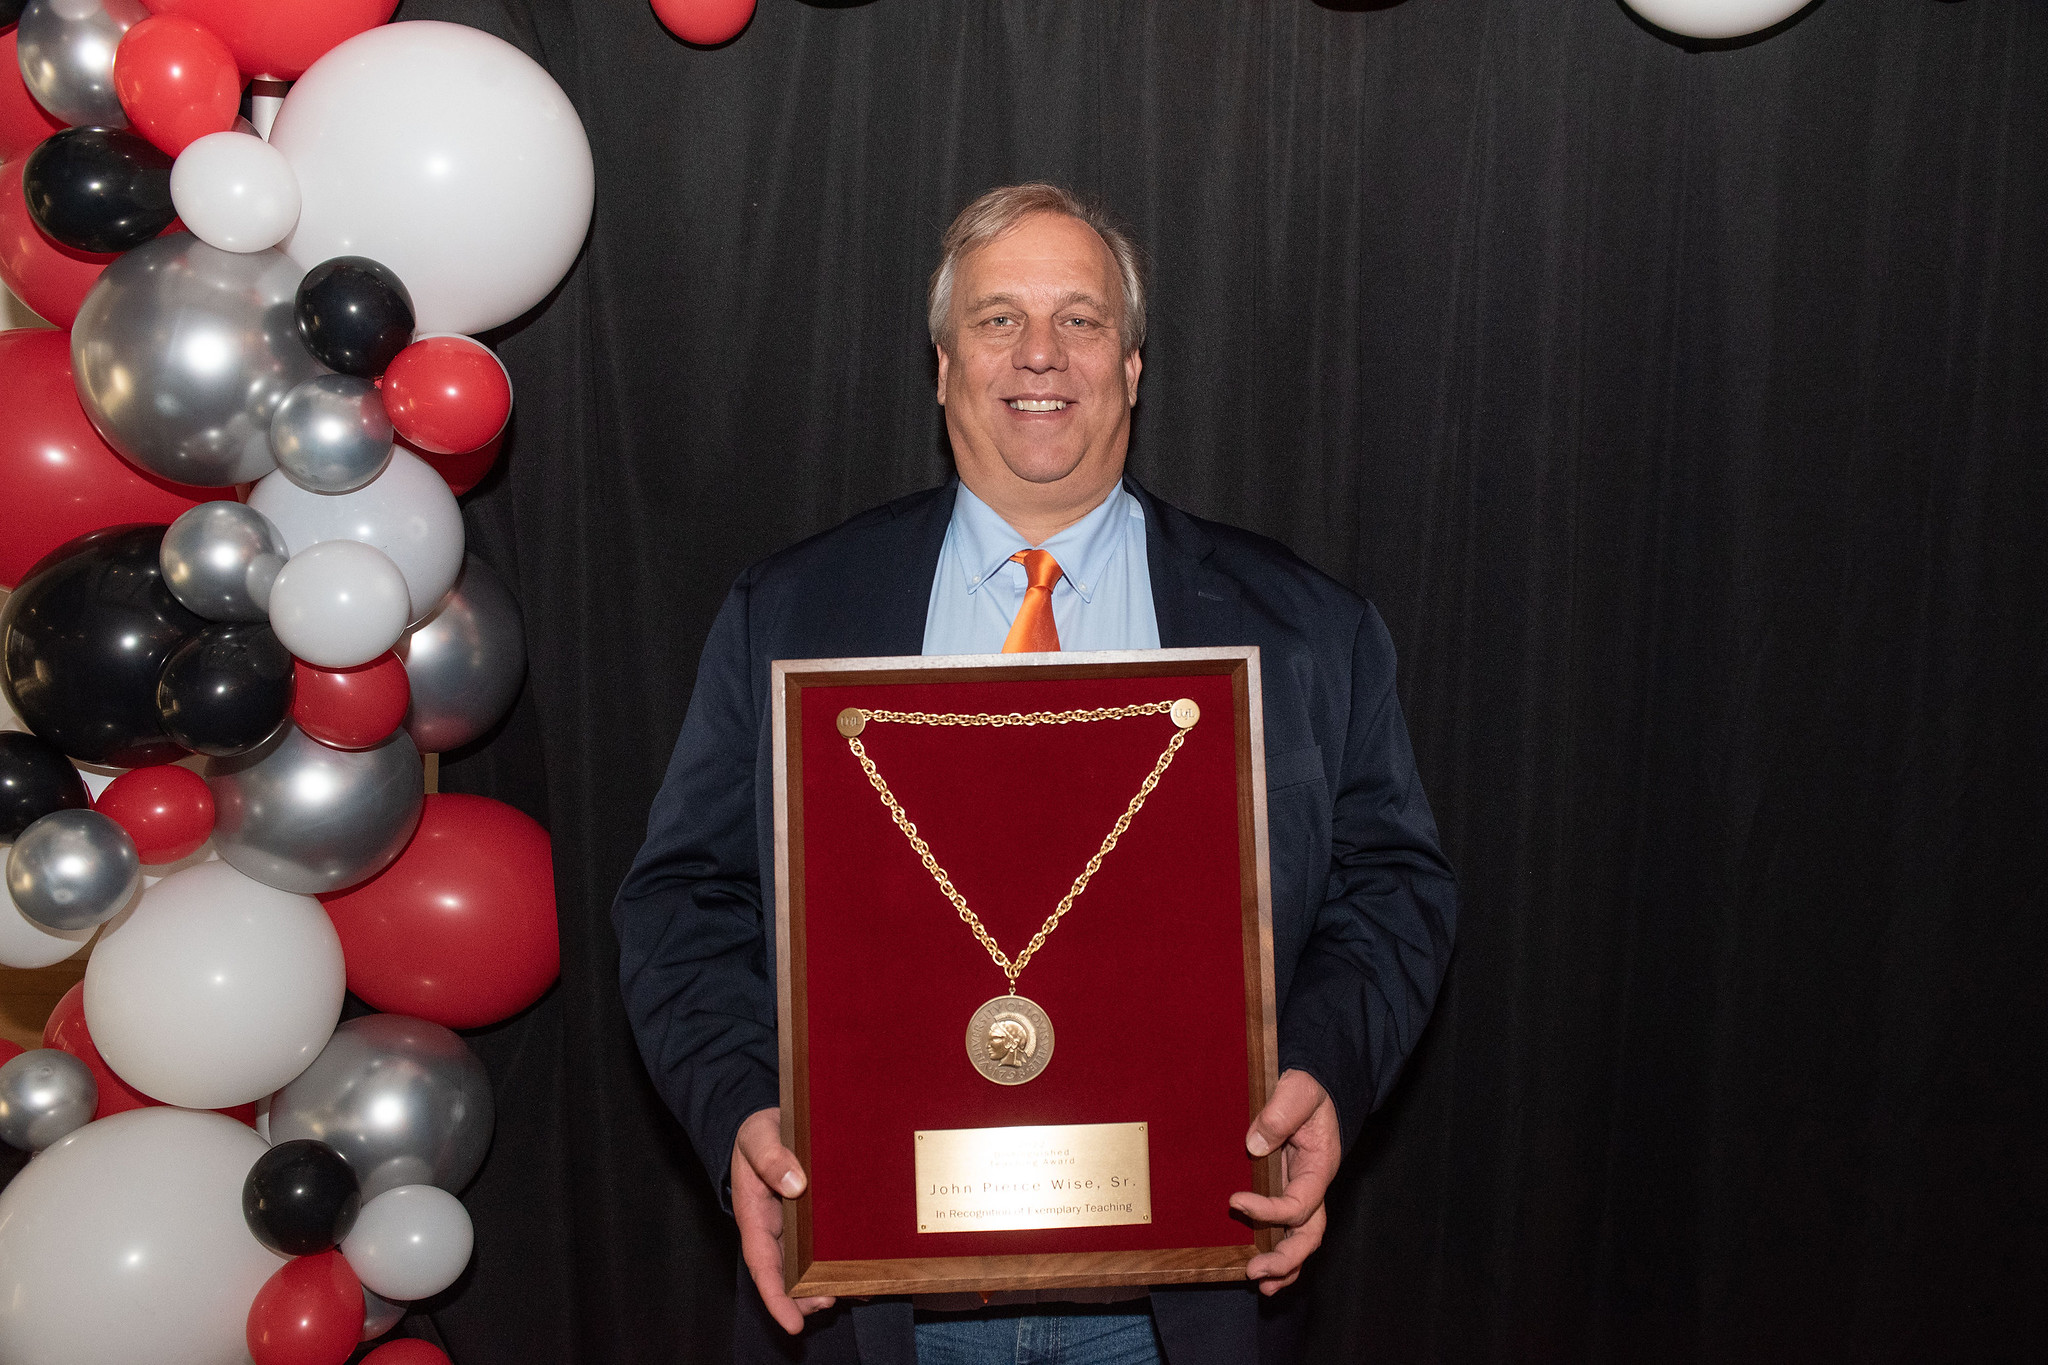 Dr. Wise President's Distinguished Teaching Award